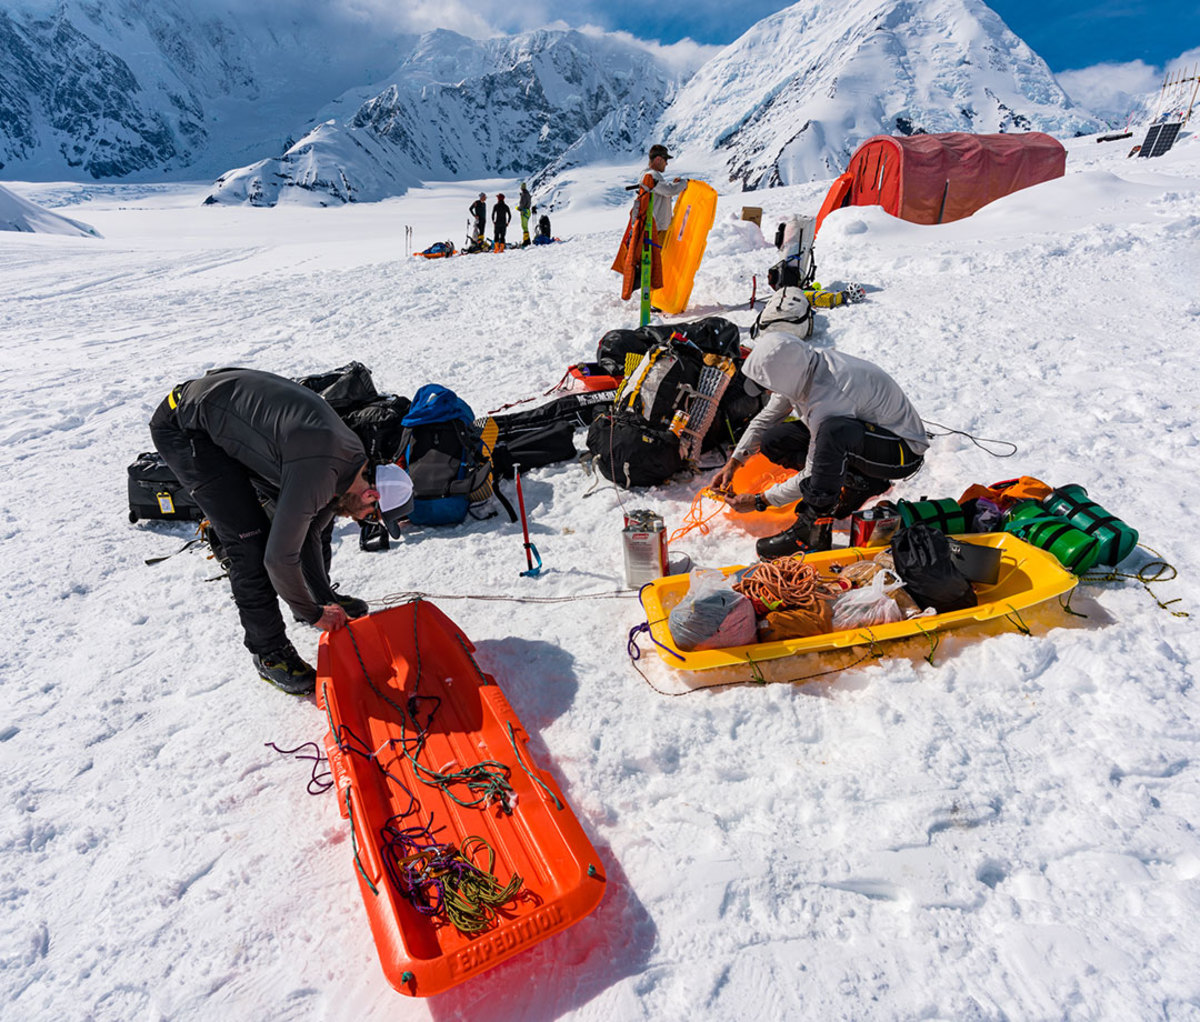 Mike Chambers, Jason Antin, and Will Seeber packing sleds with gear